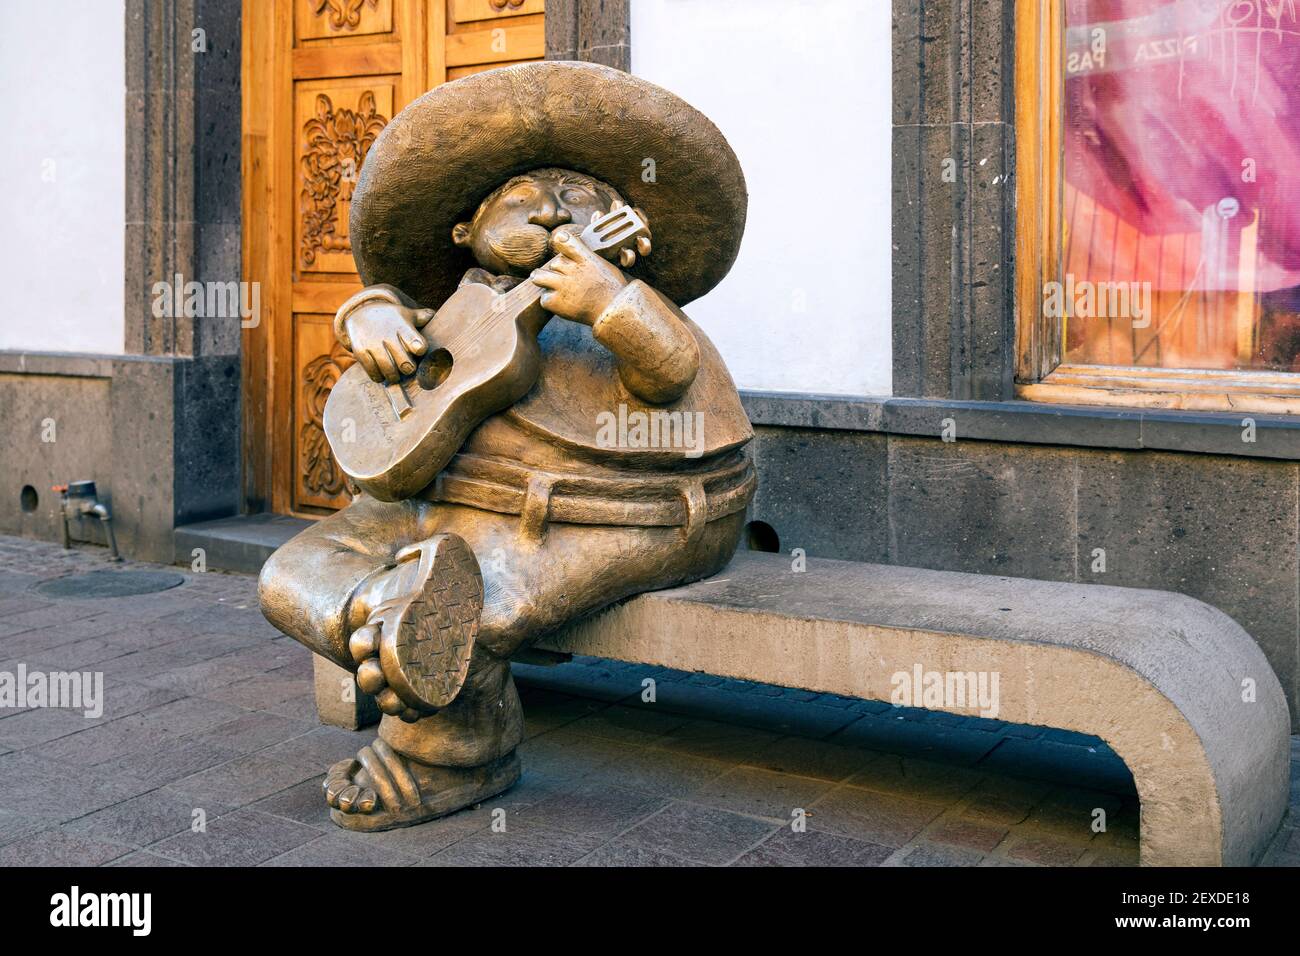 Bronze sculpture of Mariachi sitting on bench by sculptor Rodo Padilla in Calle Independencia at Tlaquepaque, Guadalajara, Jalisco, Mexico Stock Photo